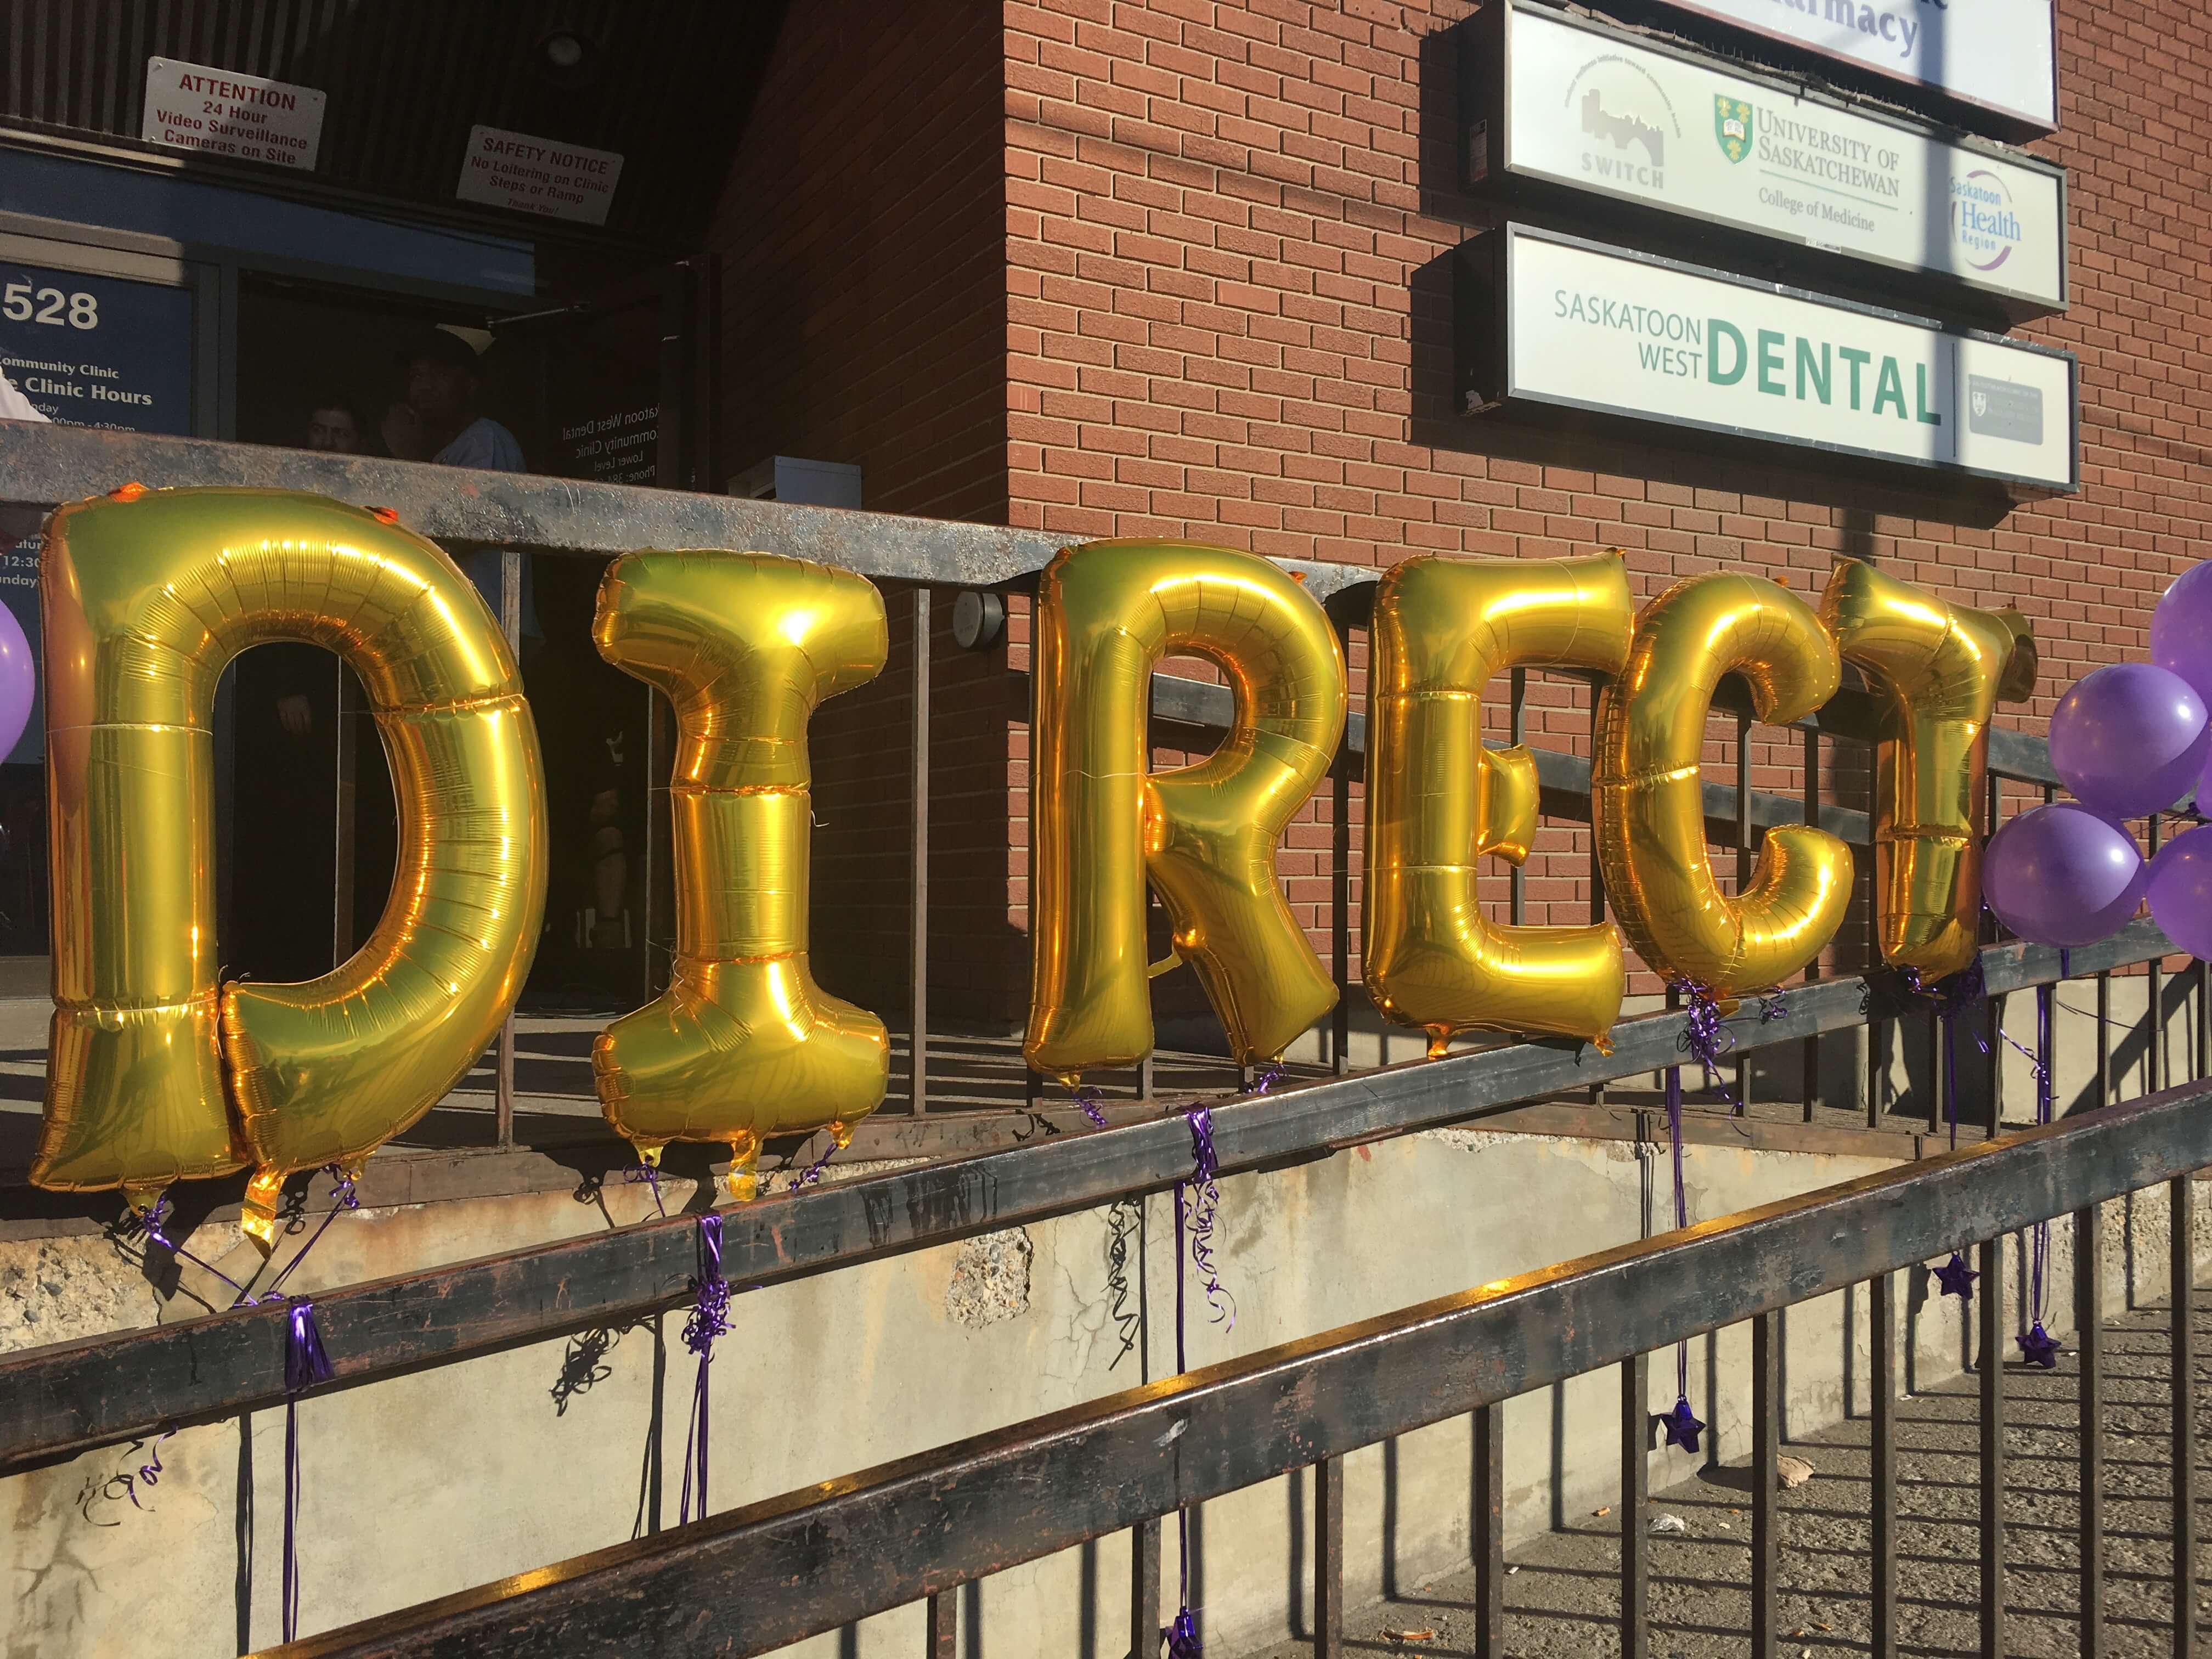 A little dental floss was all that was needed to keep the wind from wreaking havoc on the opening day balloons for DIRECT Dental. Photo by Stacey Schewaga.